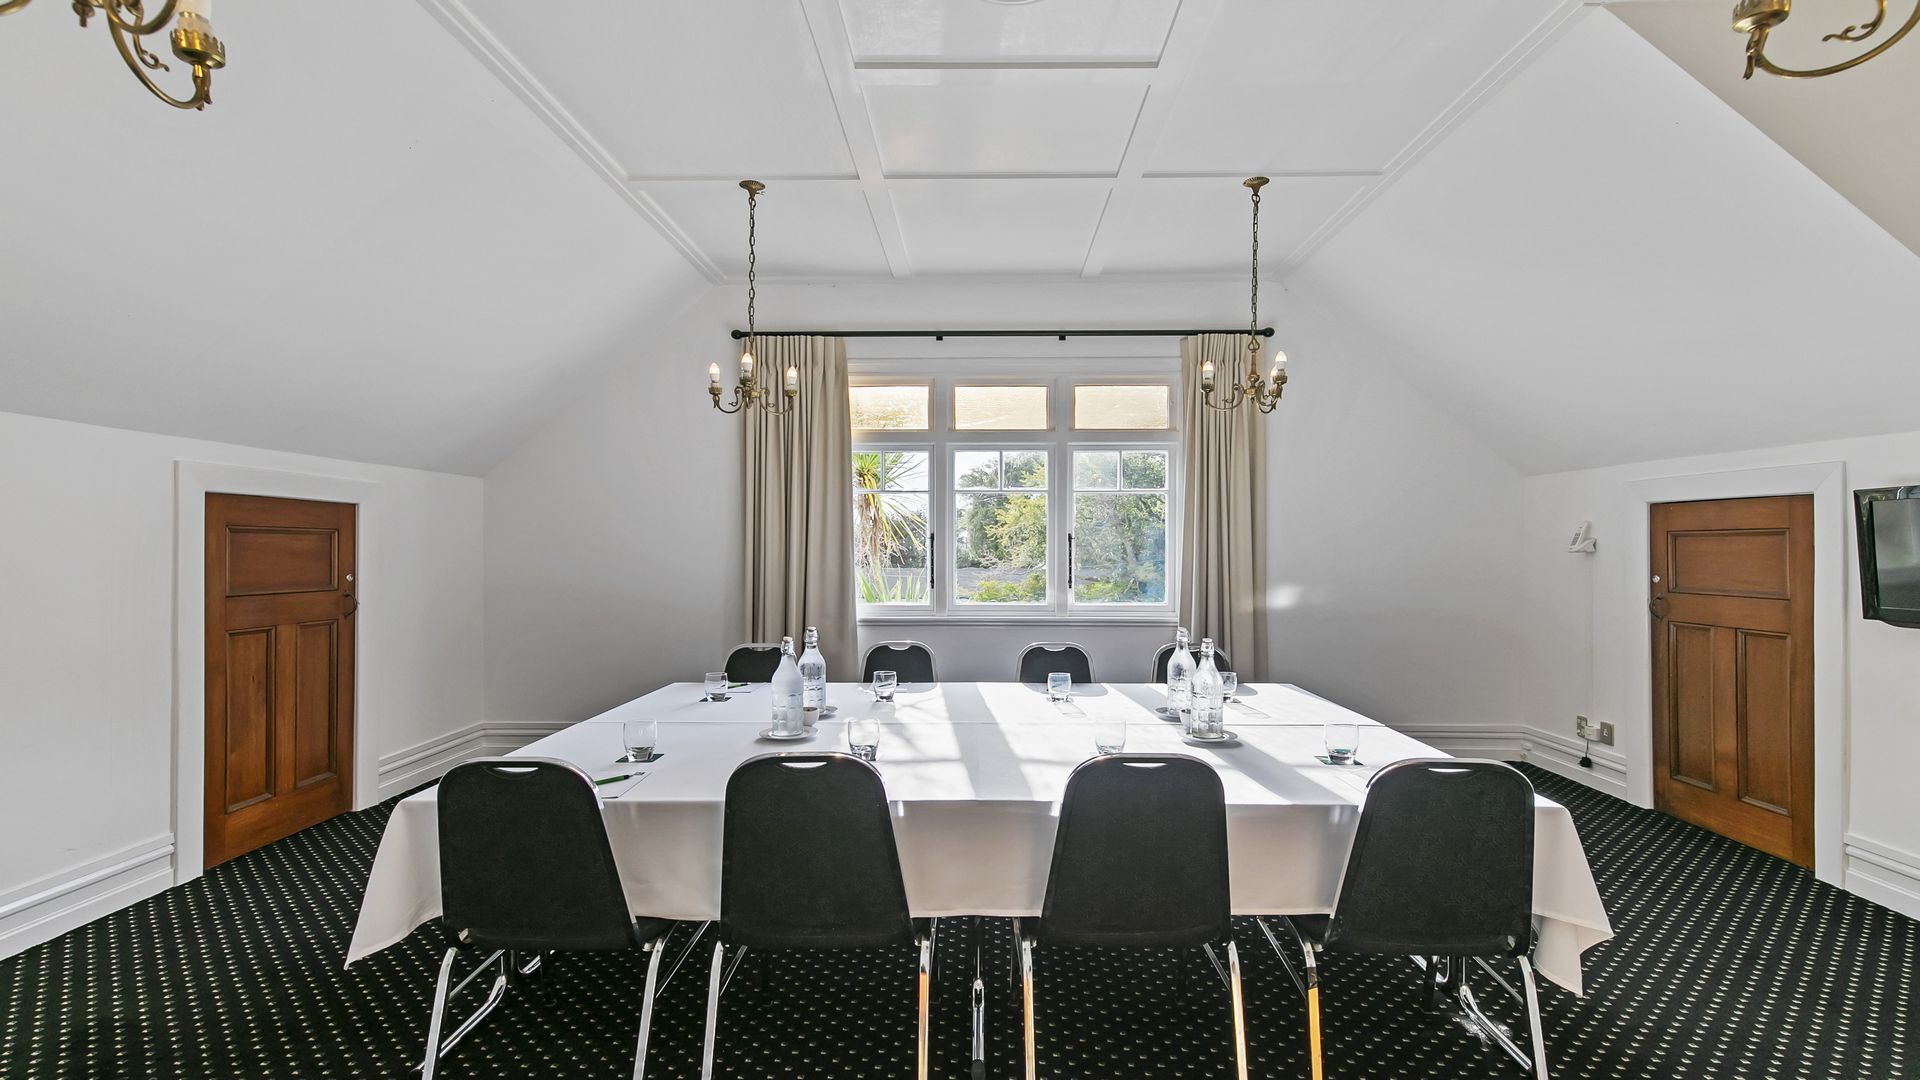 Gladstone One Is a Boardroom Or Meeting Room For up To 20 People